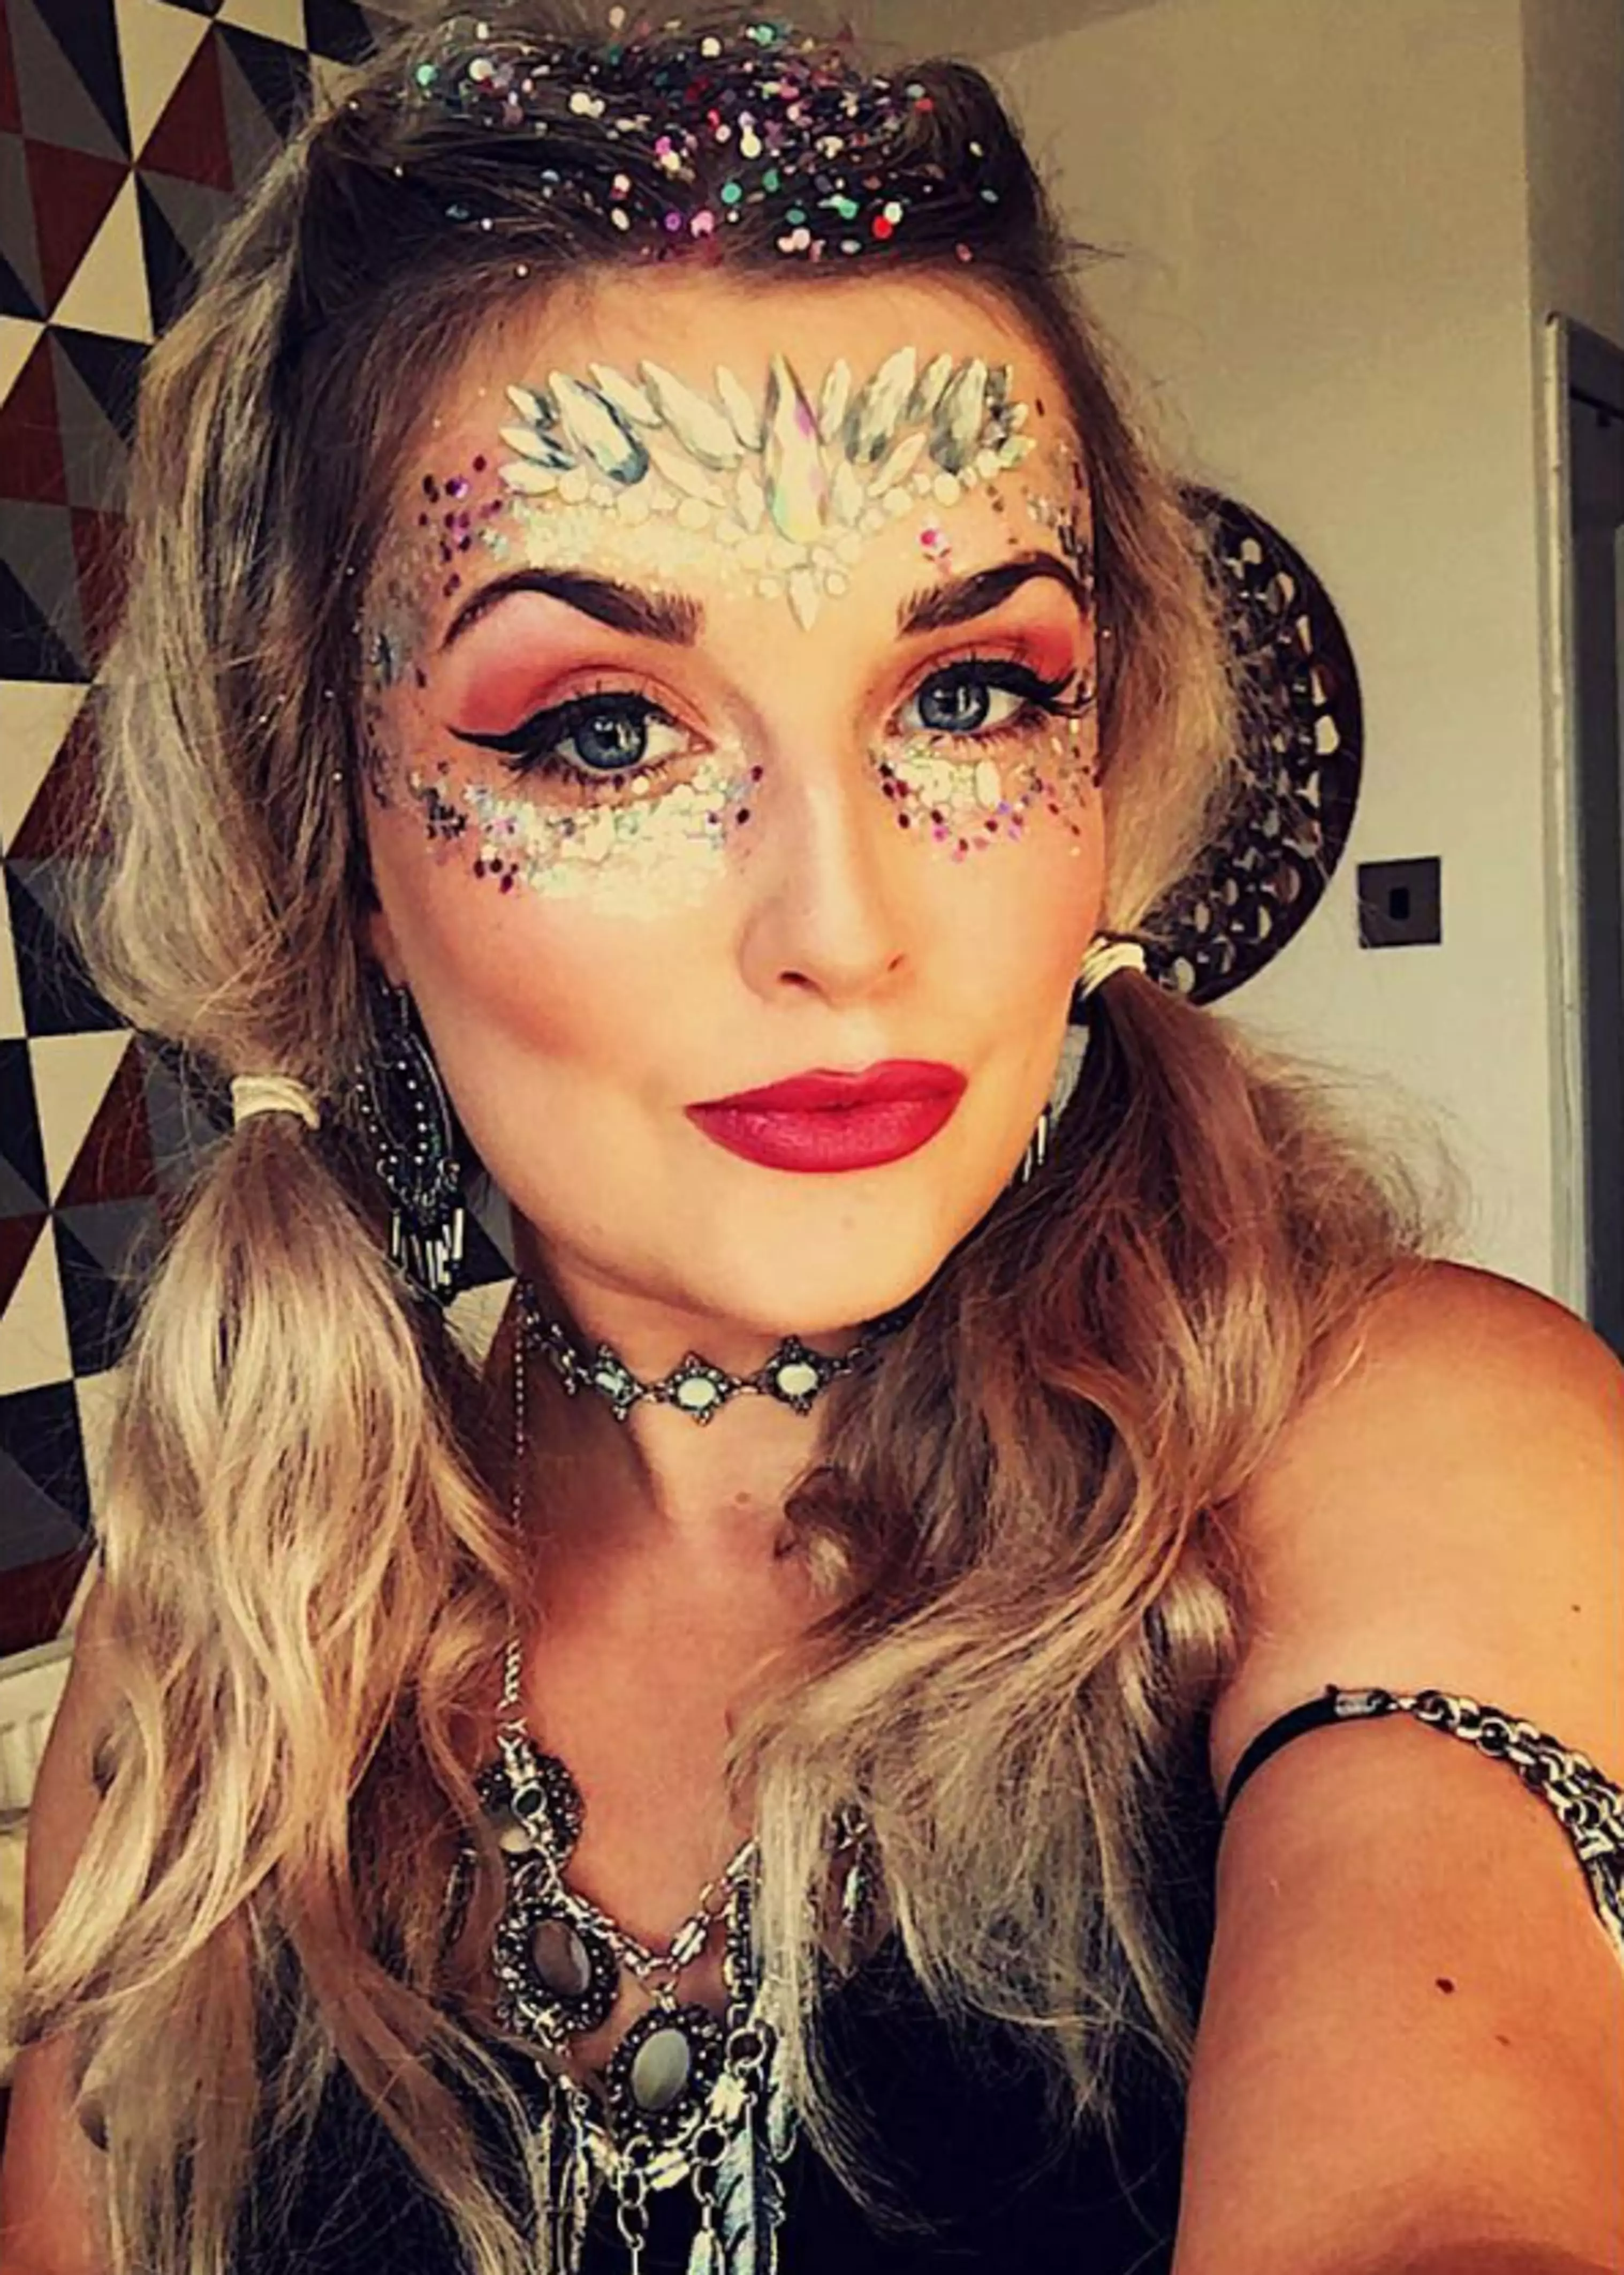 Bethany Gallagher said without her ostomy bag she wouldn't be able to enjoy festivals with her friends.